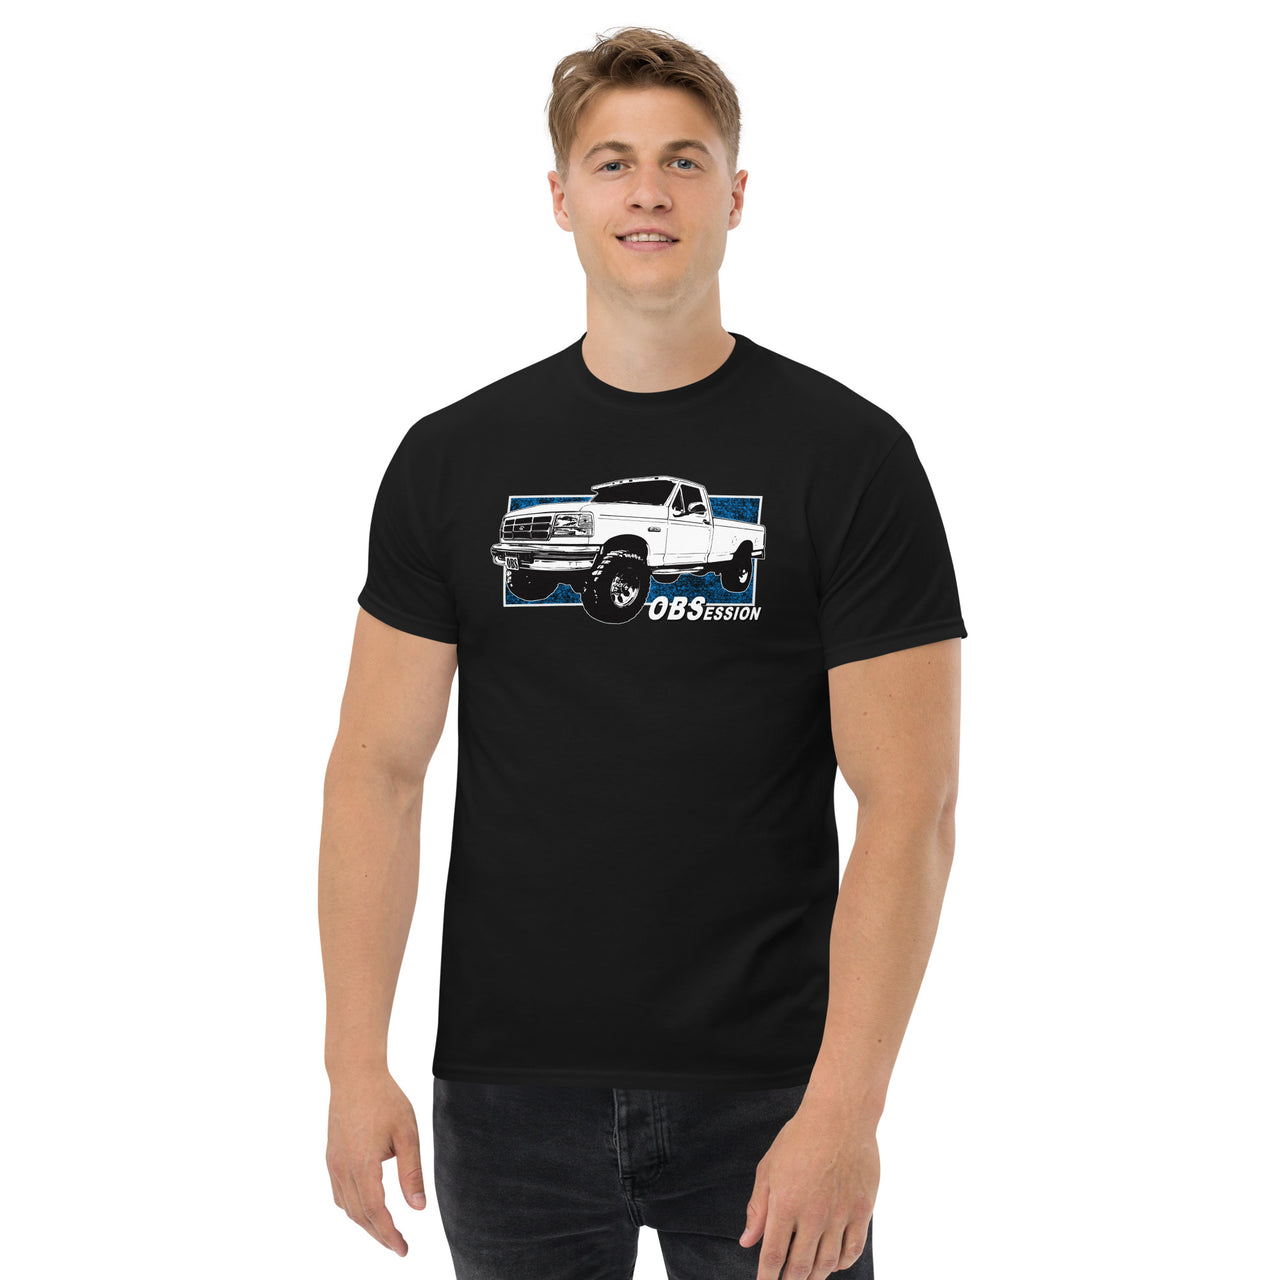 OBS Truck T-Shirt With Single Cab 90s Ford Truck - modeled in black